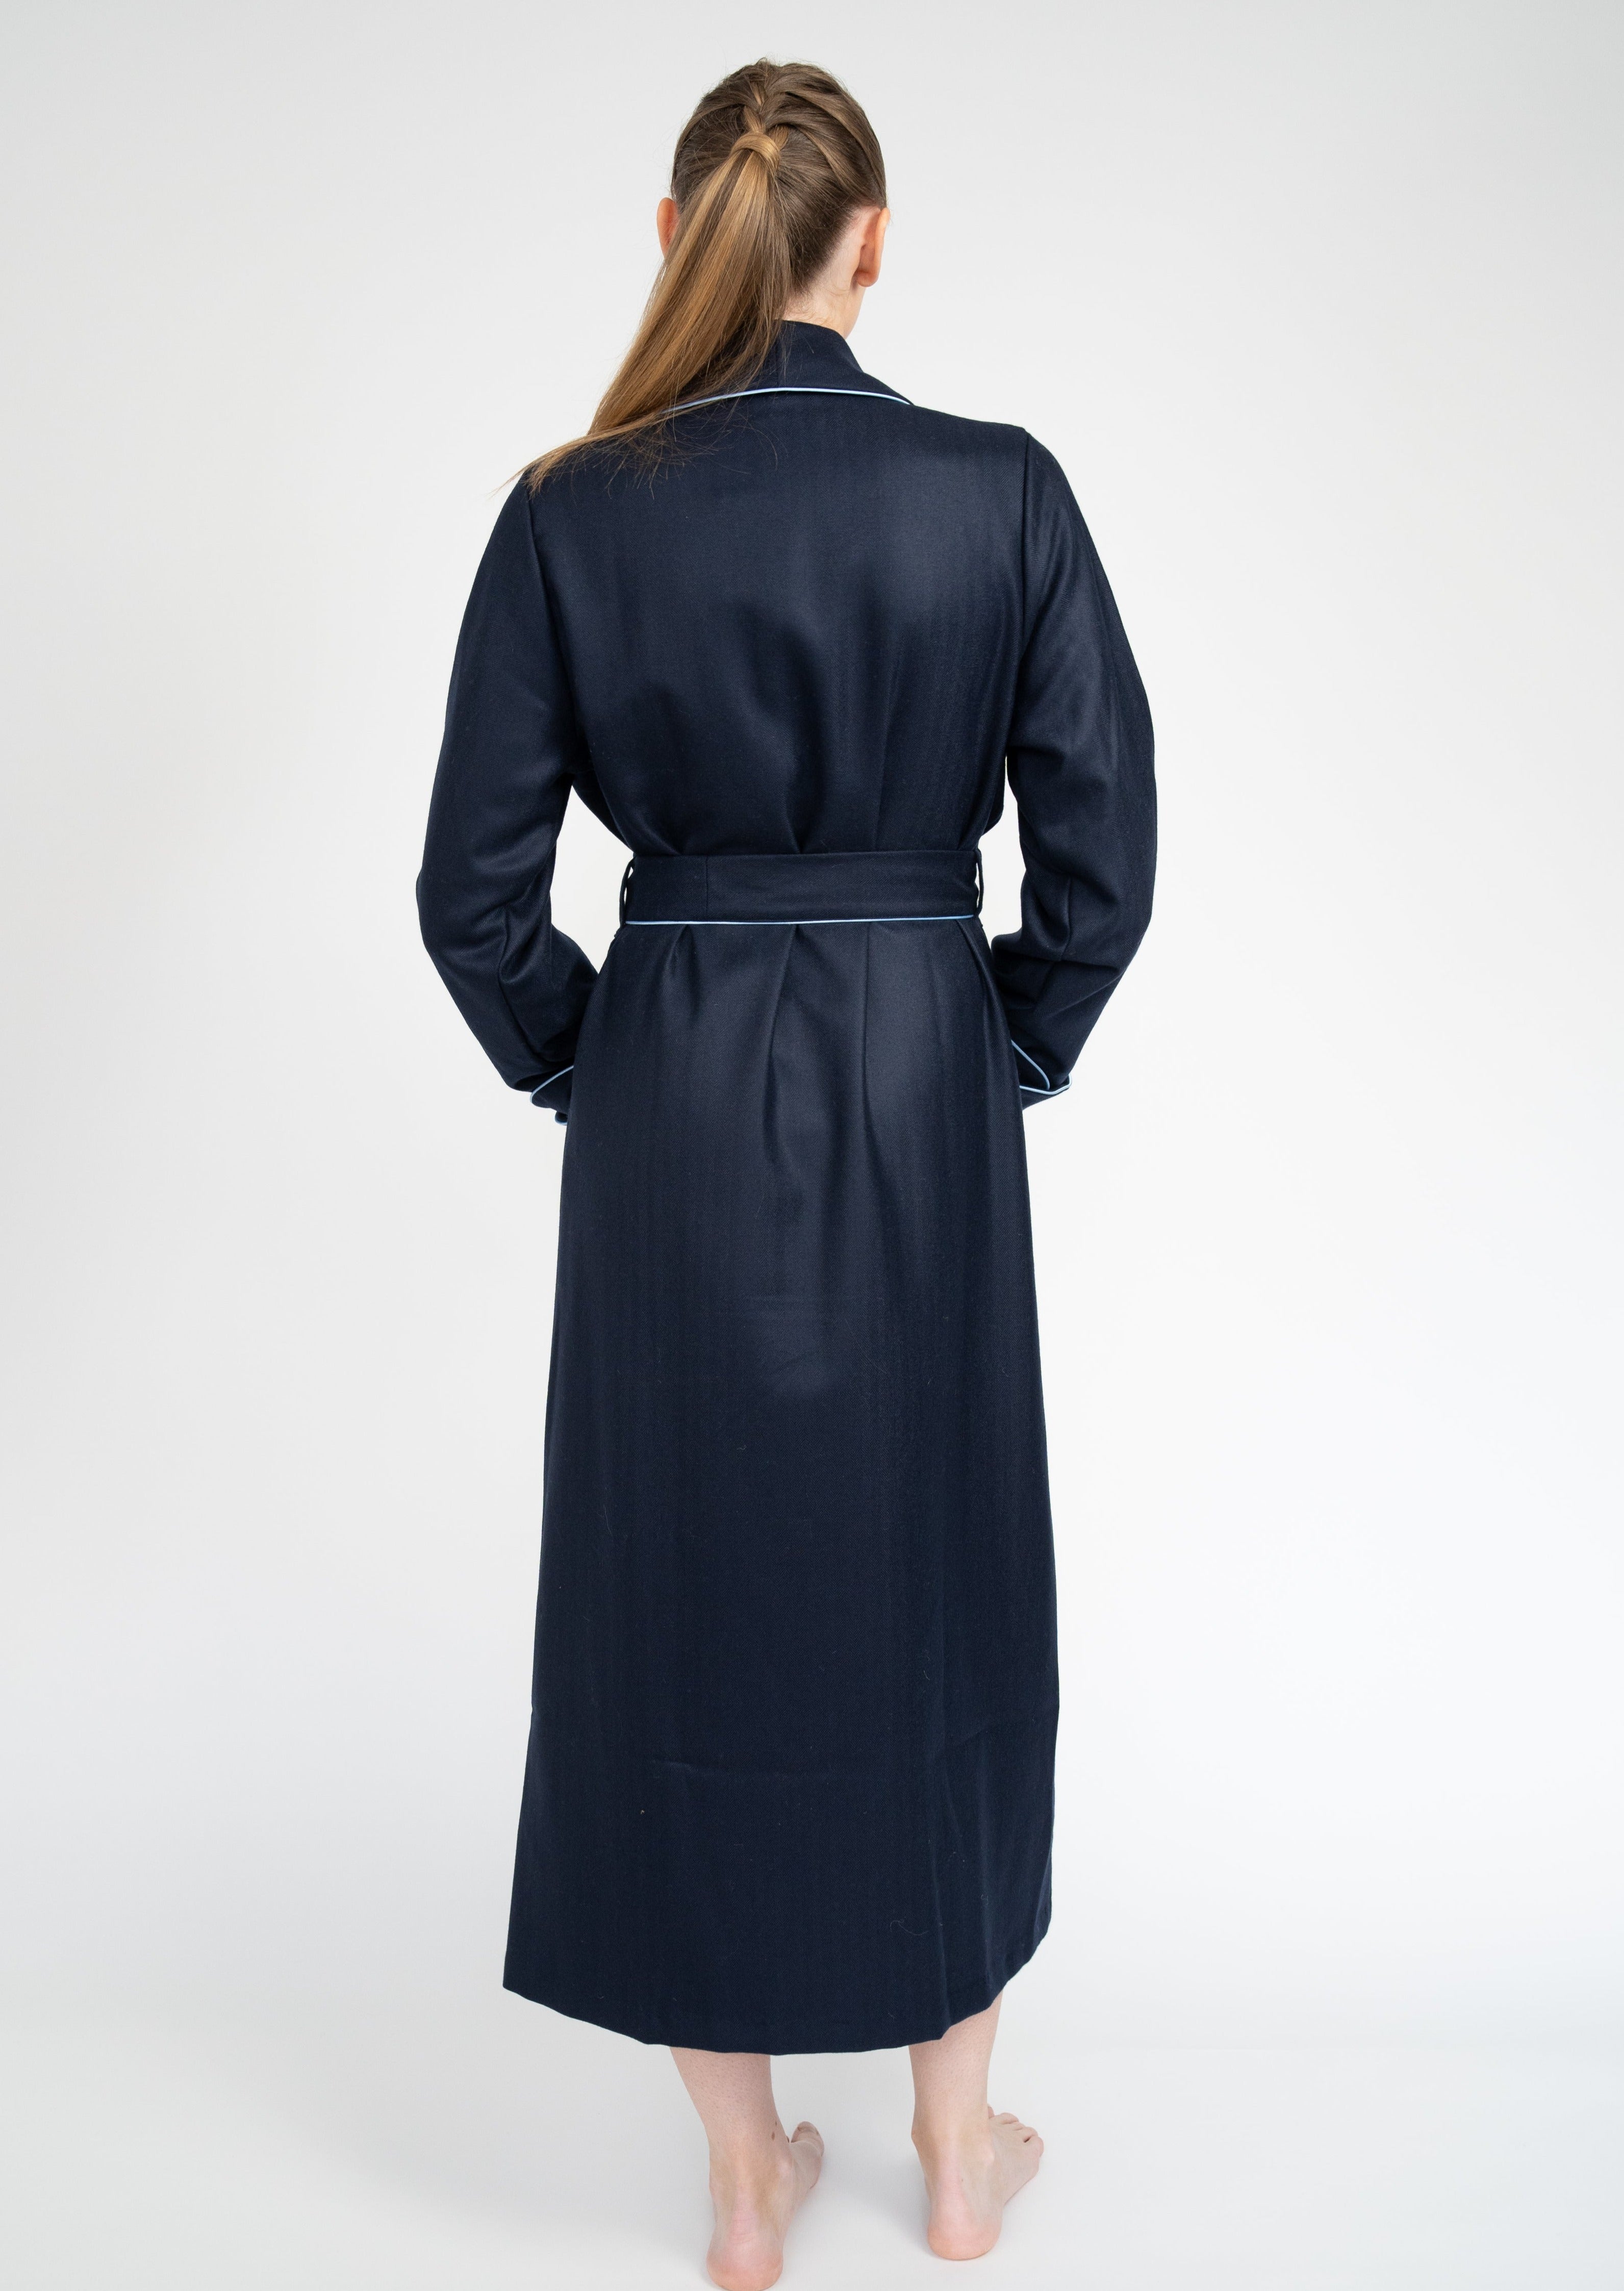 Ladies Cashmere Dressing Gowns